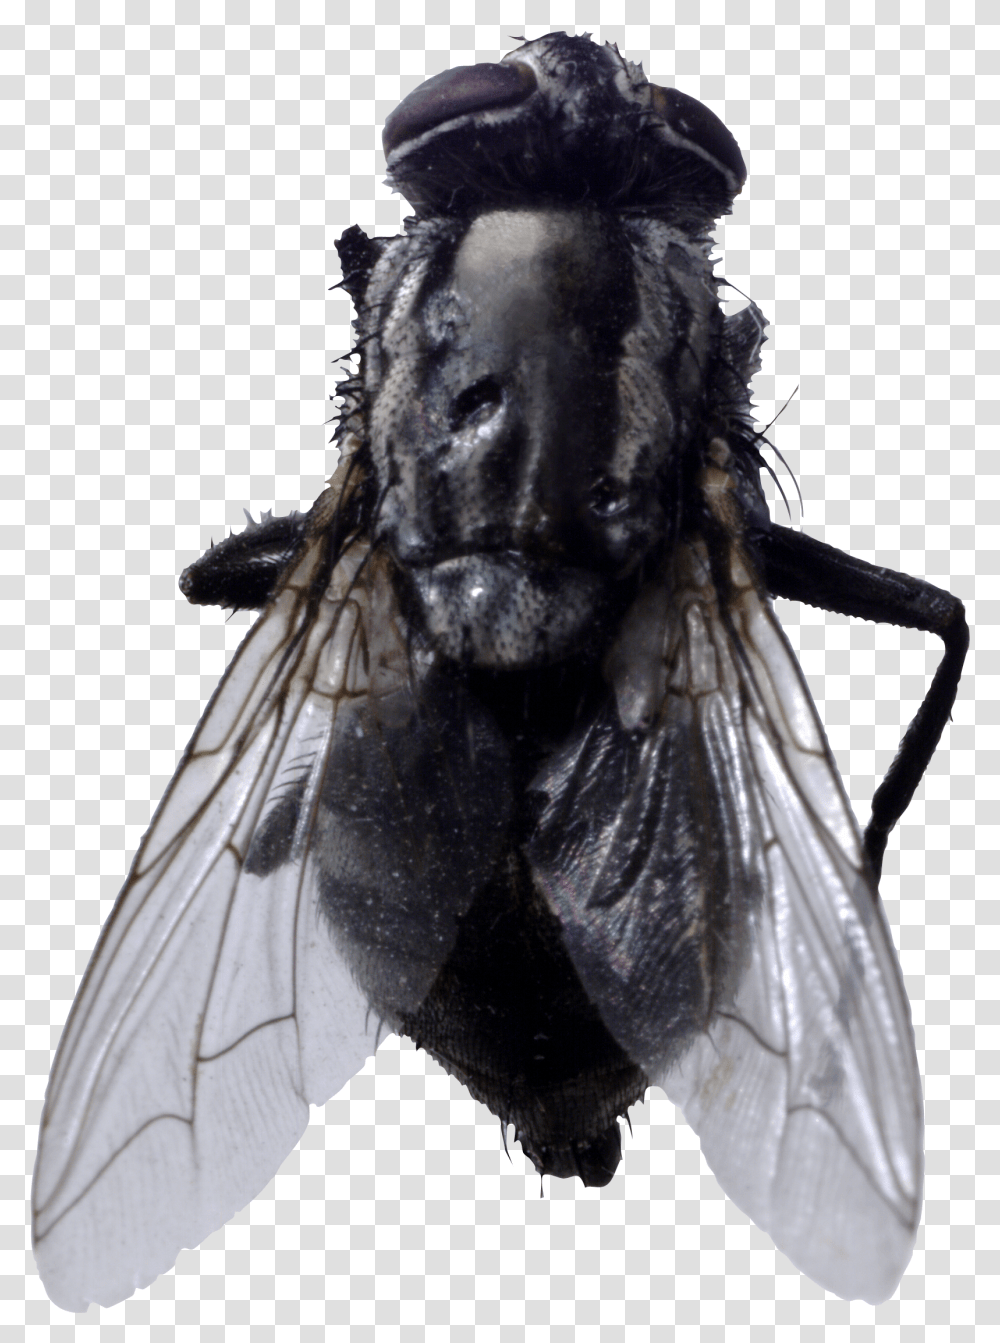 Fly Image Fly Transparent Png